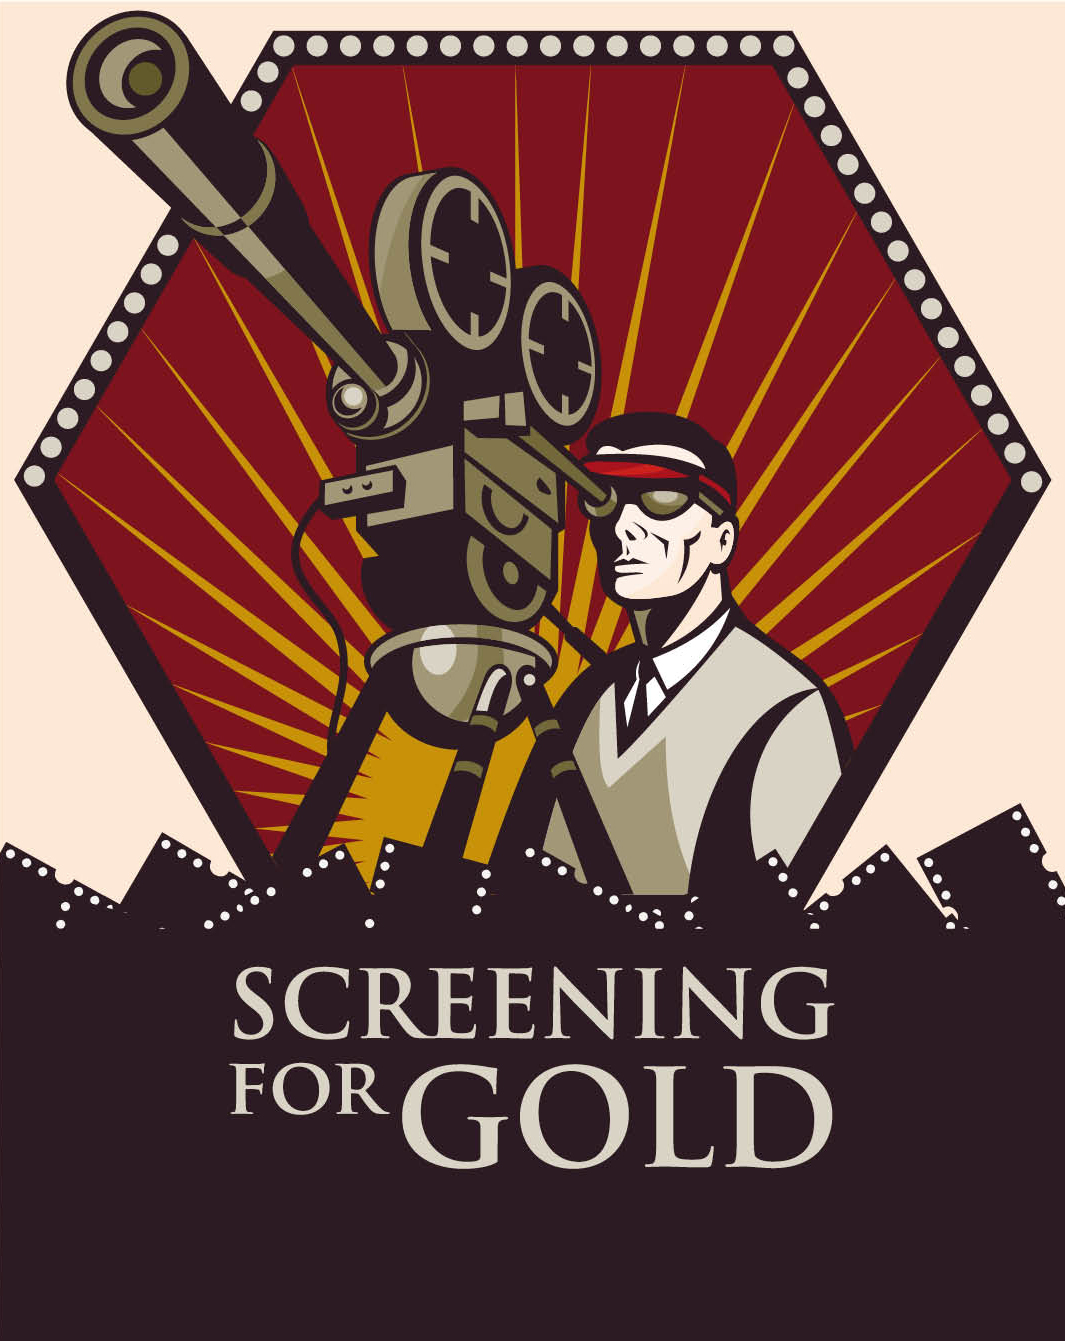 Screening for Gold